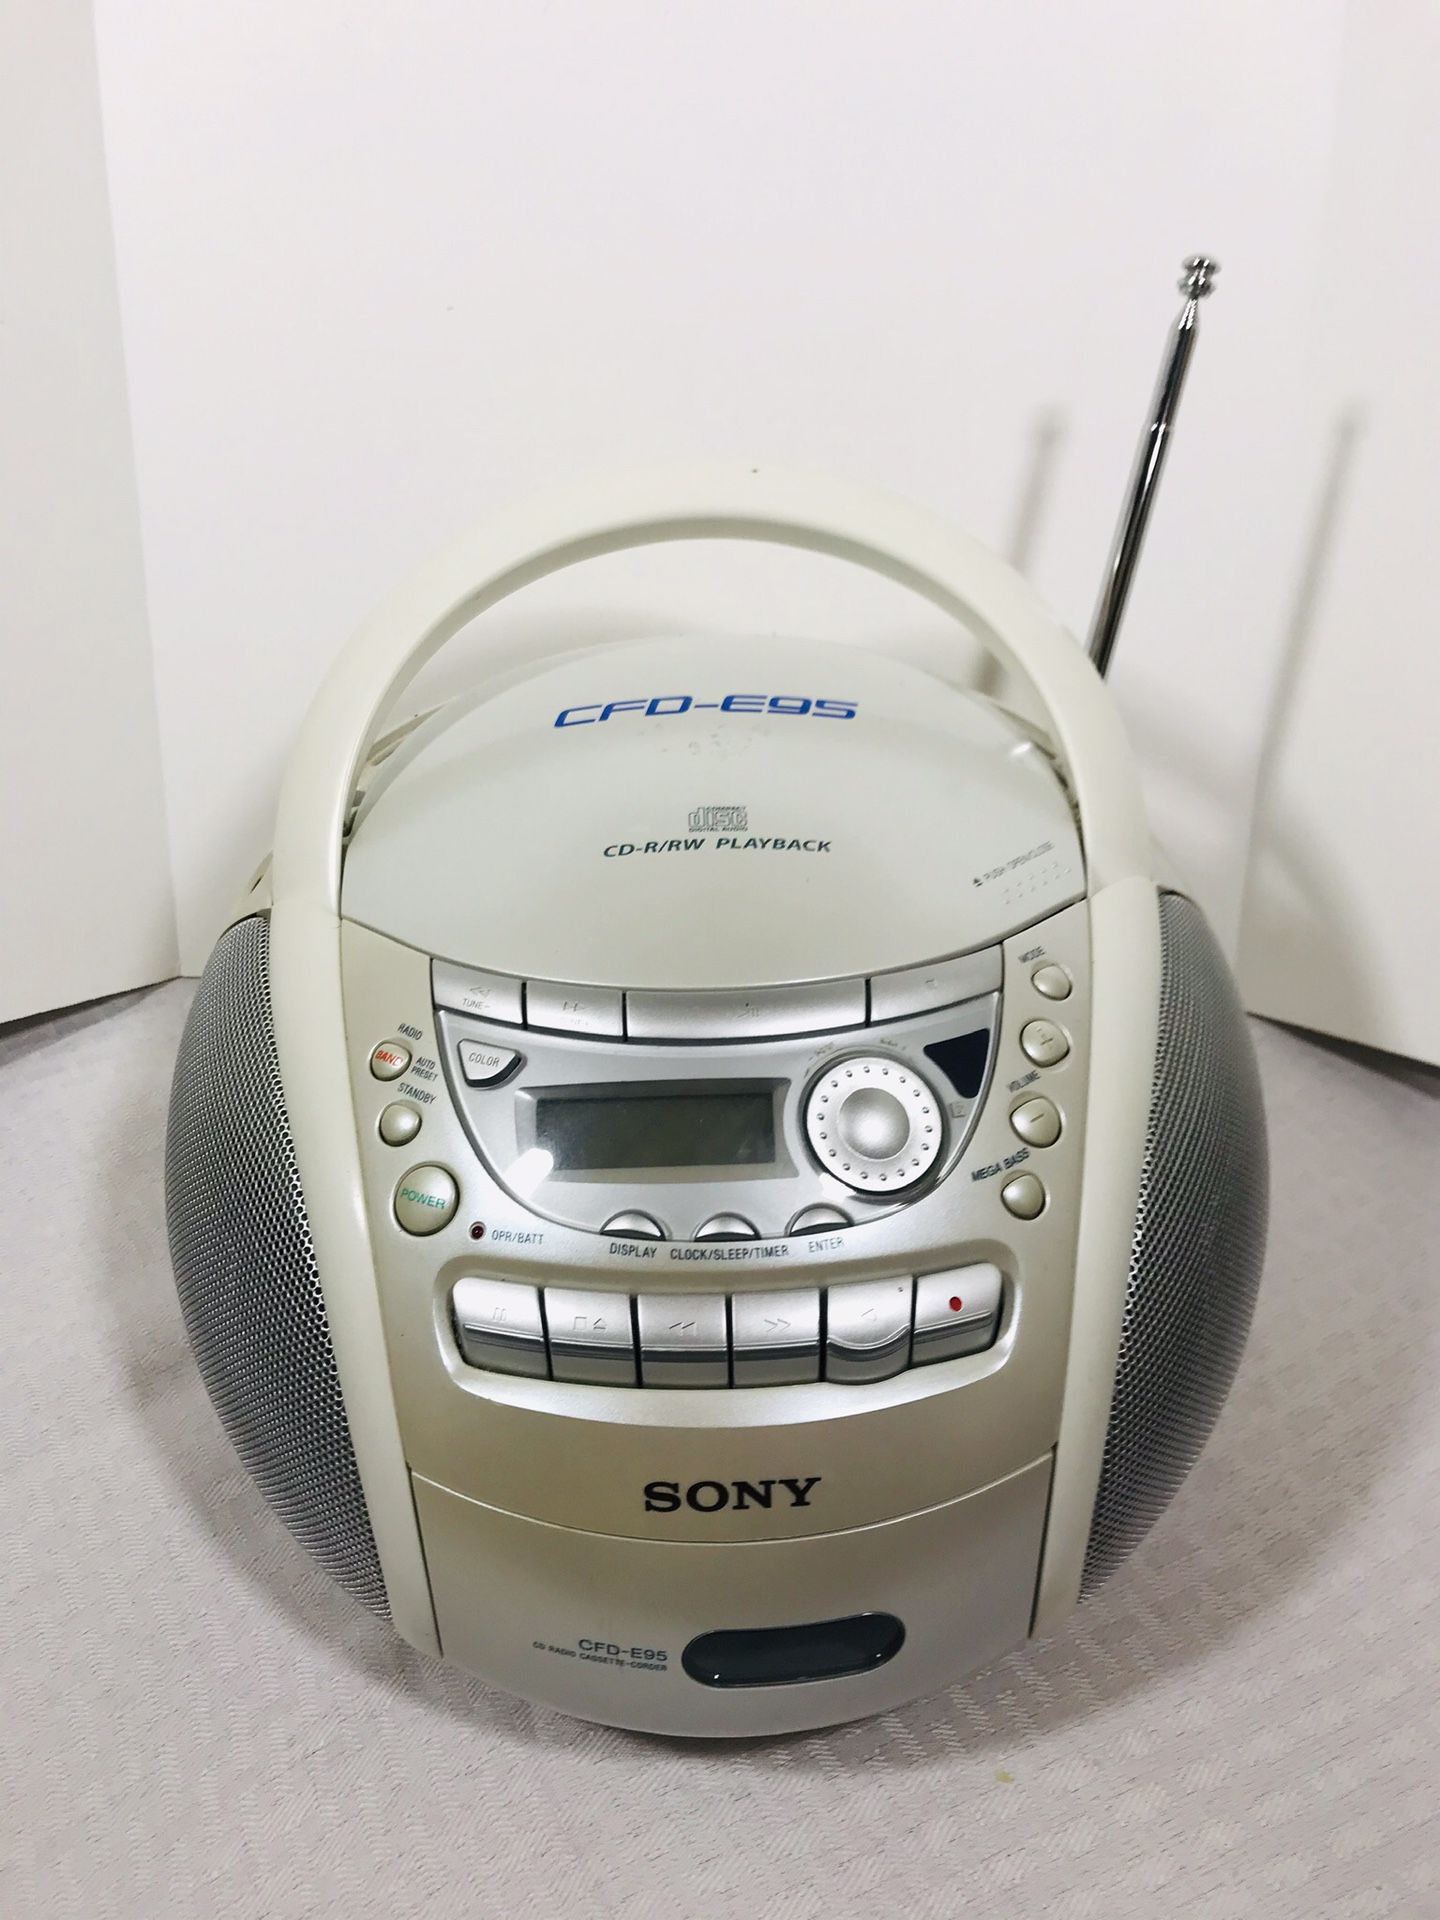 Vintage Sony Boombox CFD-E95 Radio CD Player Cassette Player Recorder